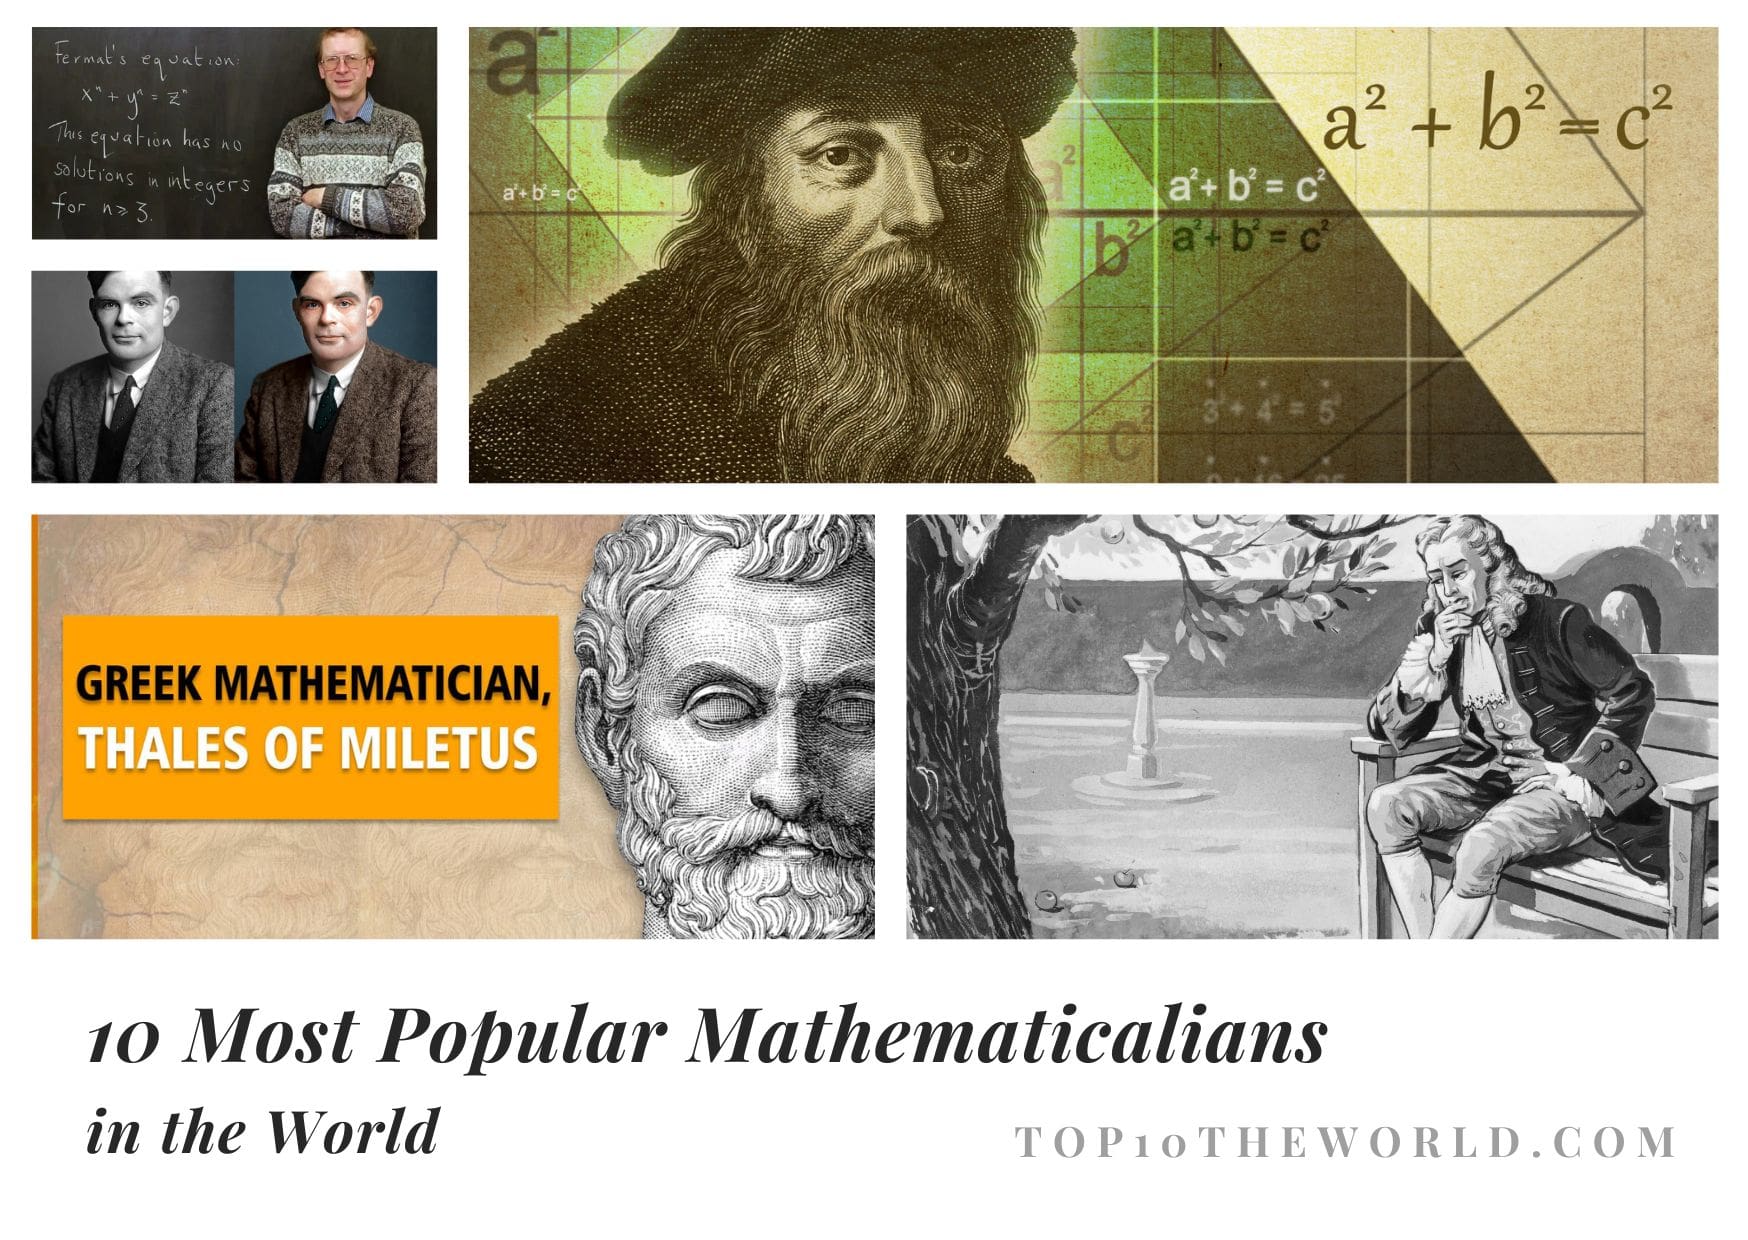 10 Most Popular Mathematicalians in the world